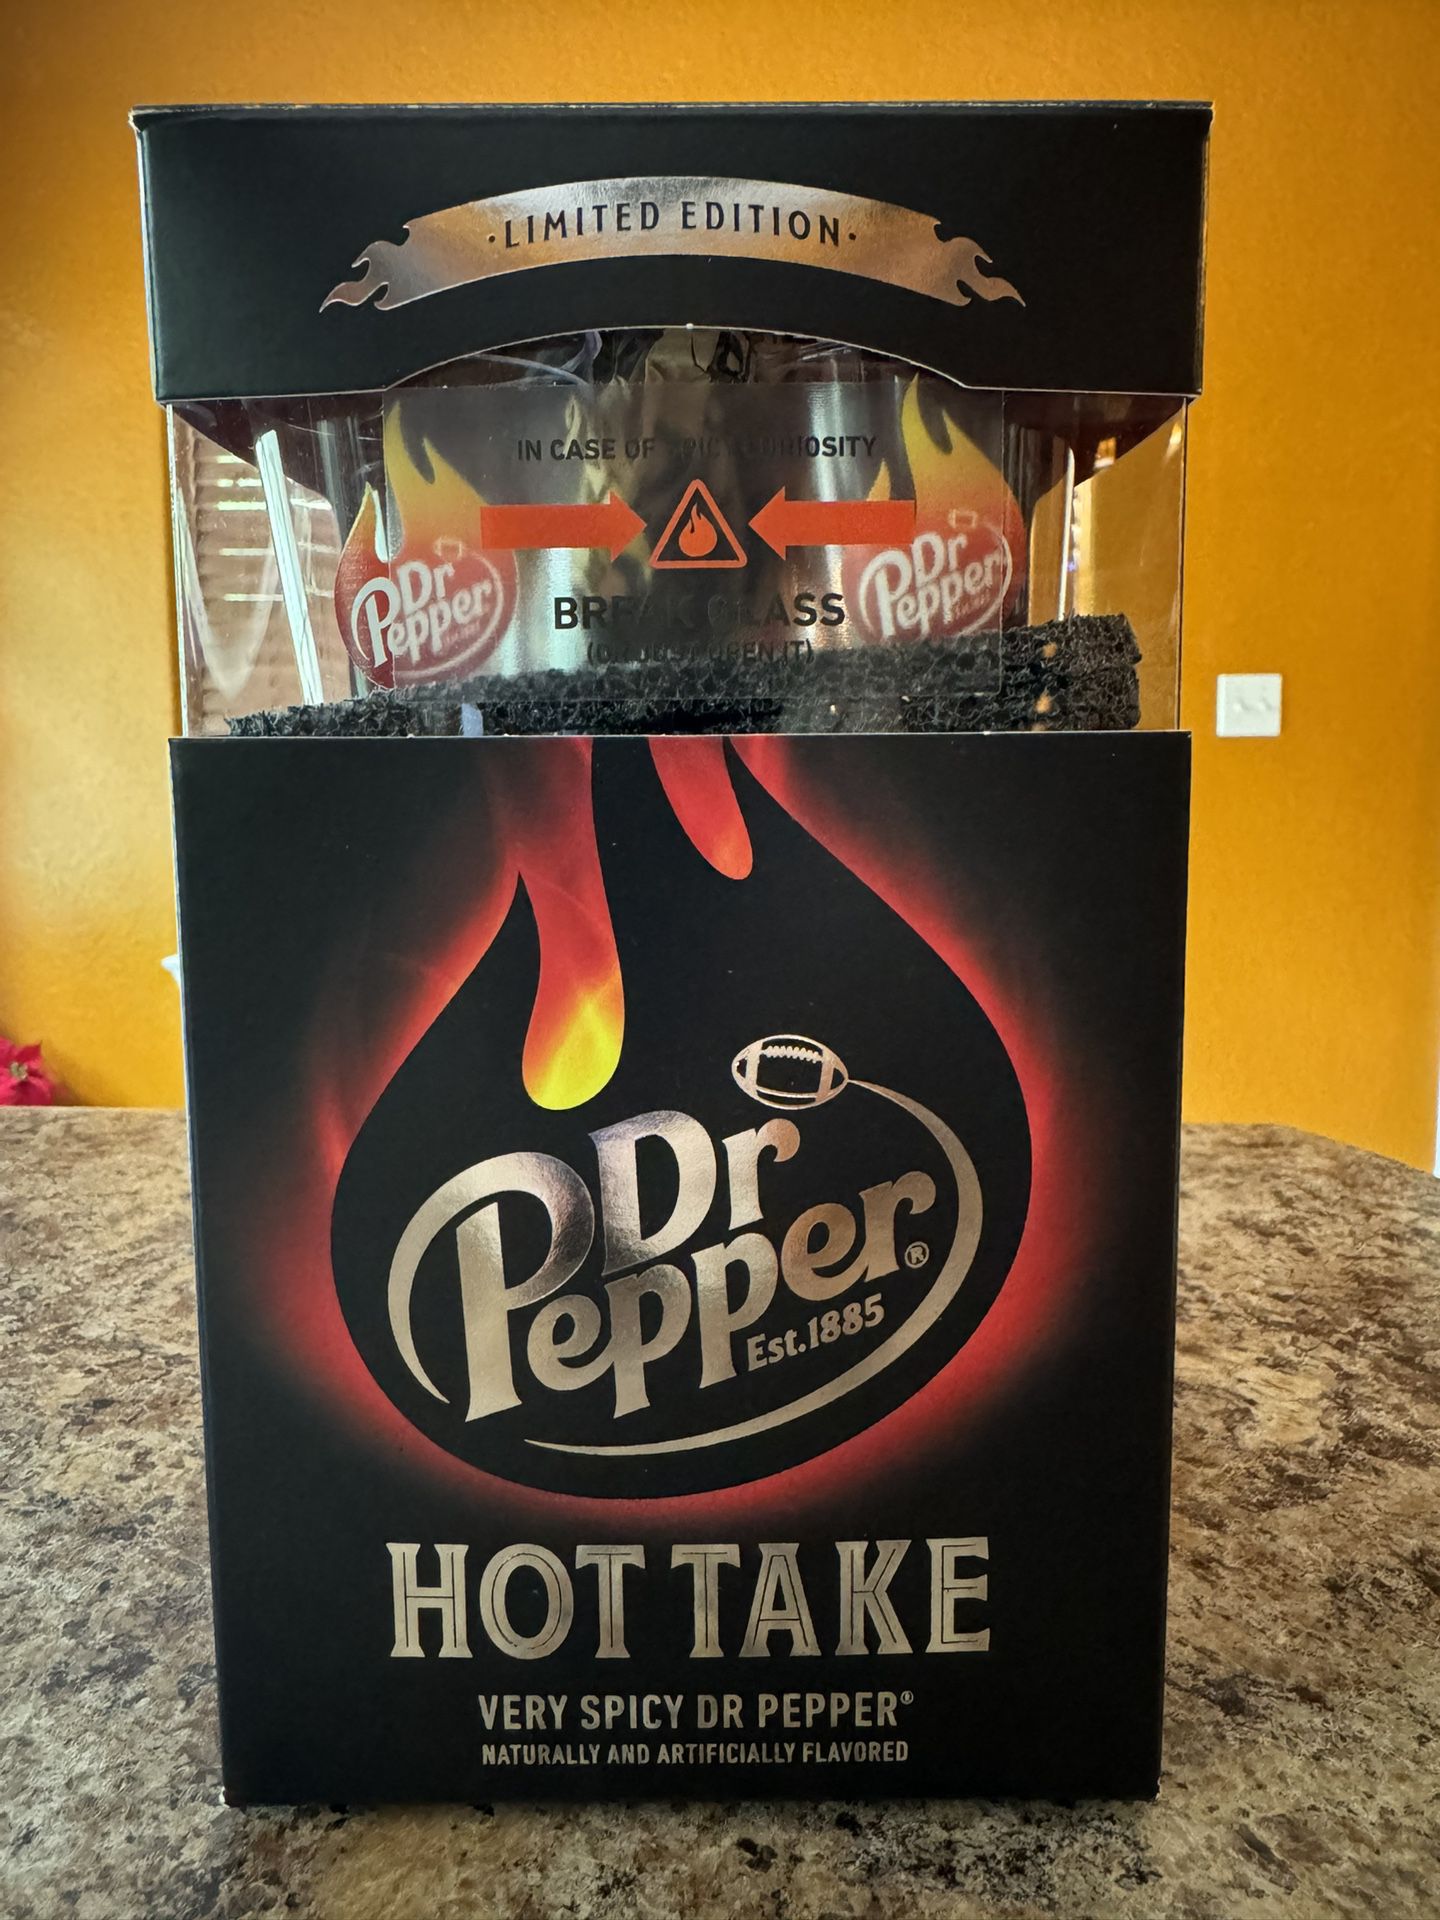 Dr. Pepper Hot Take Kit - Very Spicy Flavor Rare Limited Edition - New In Box